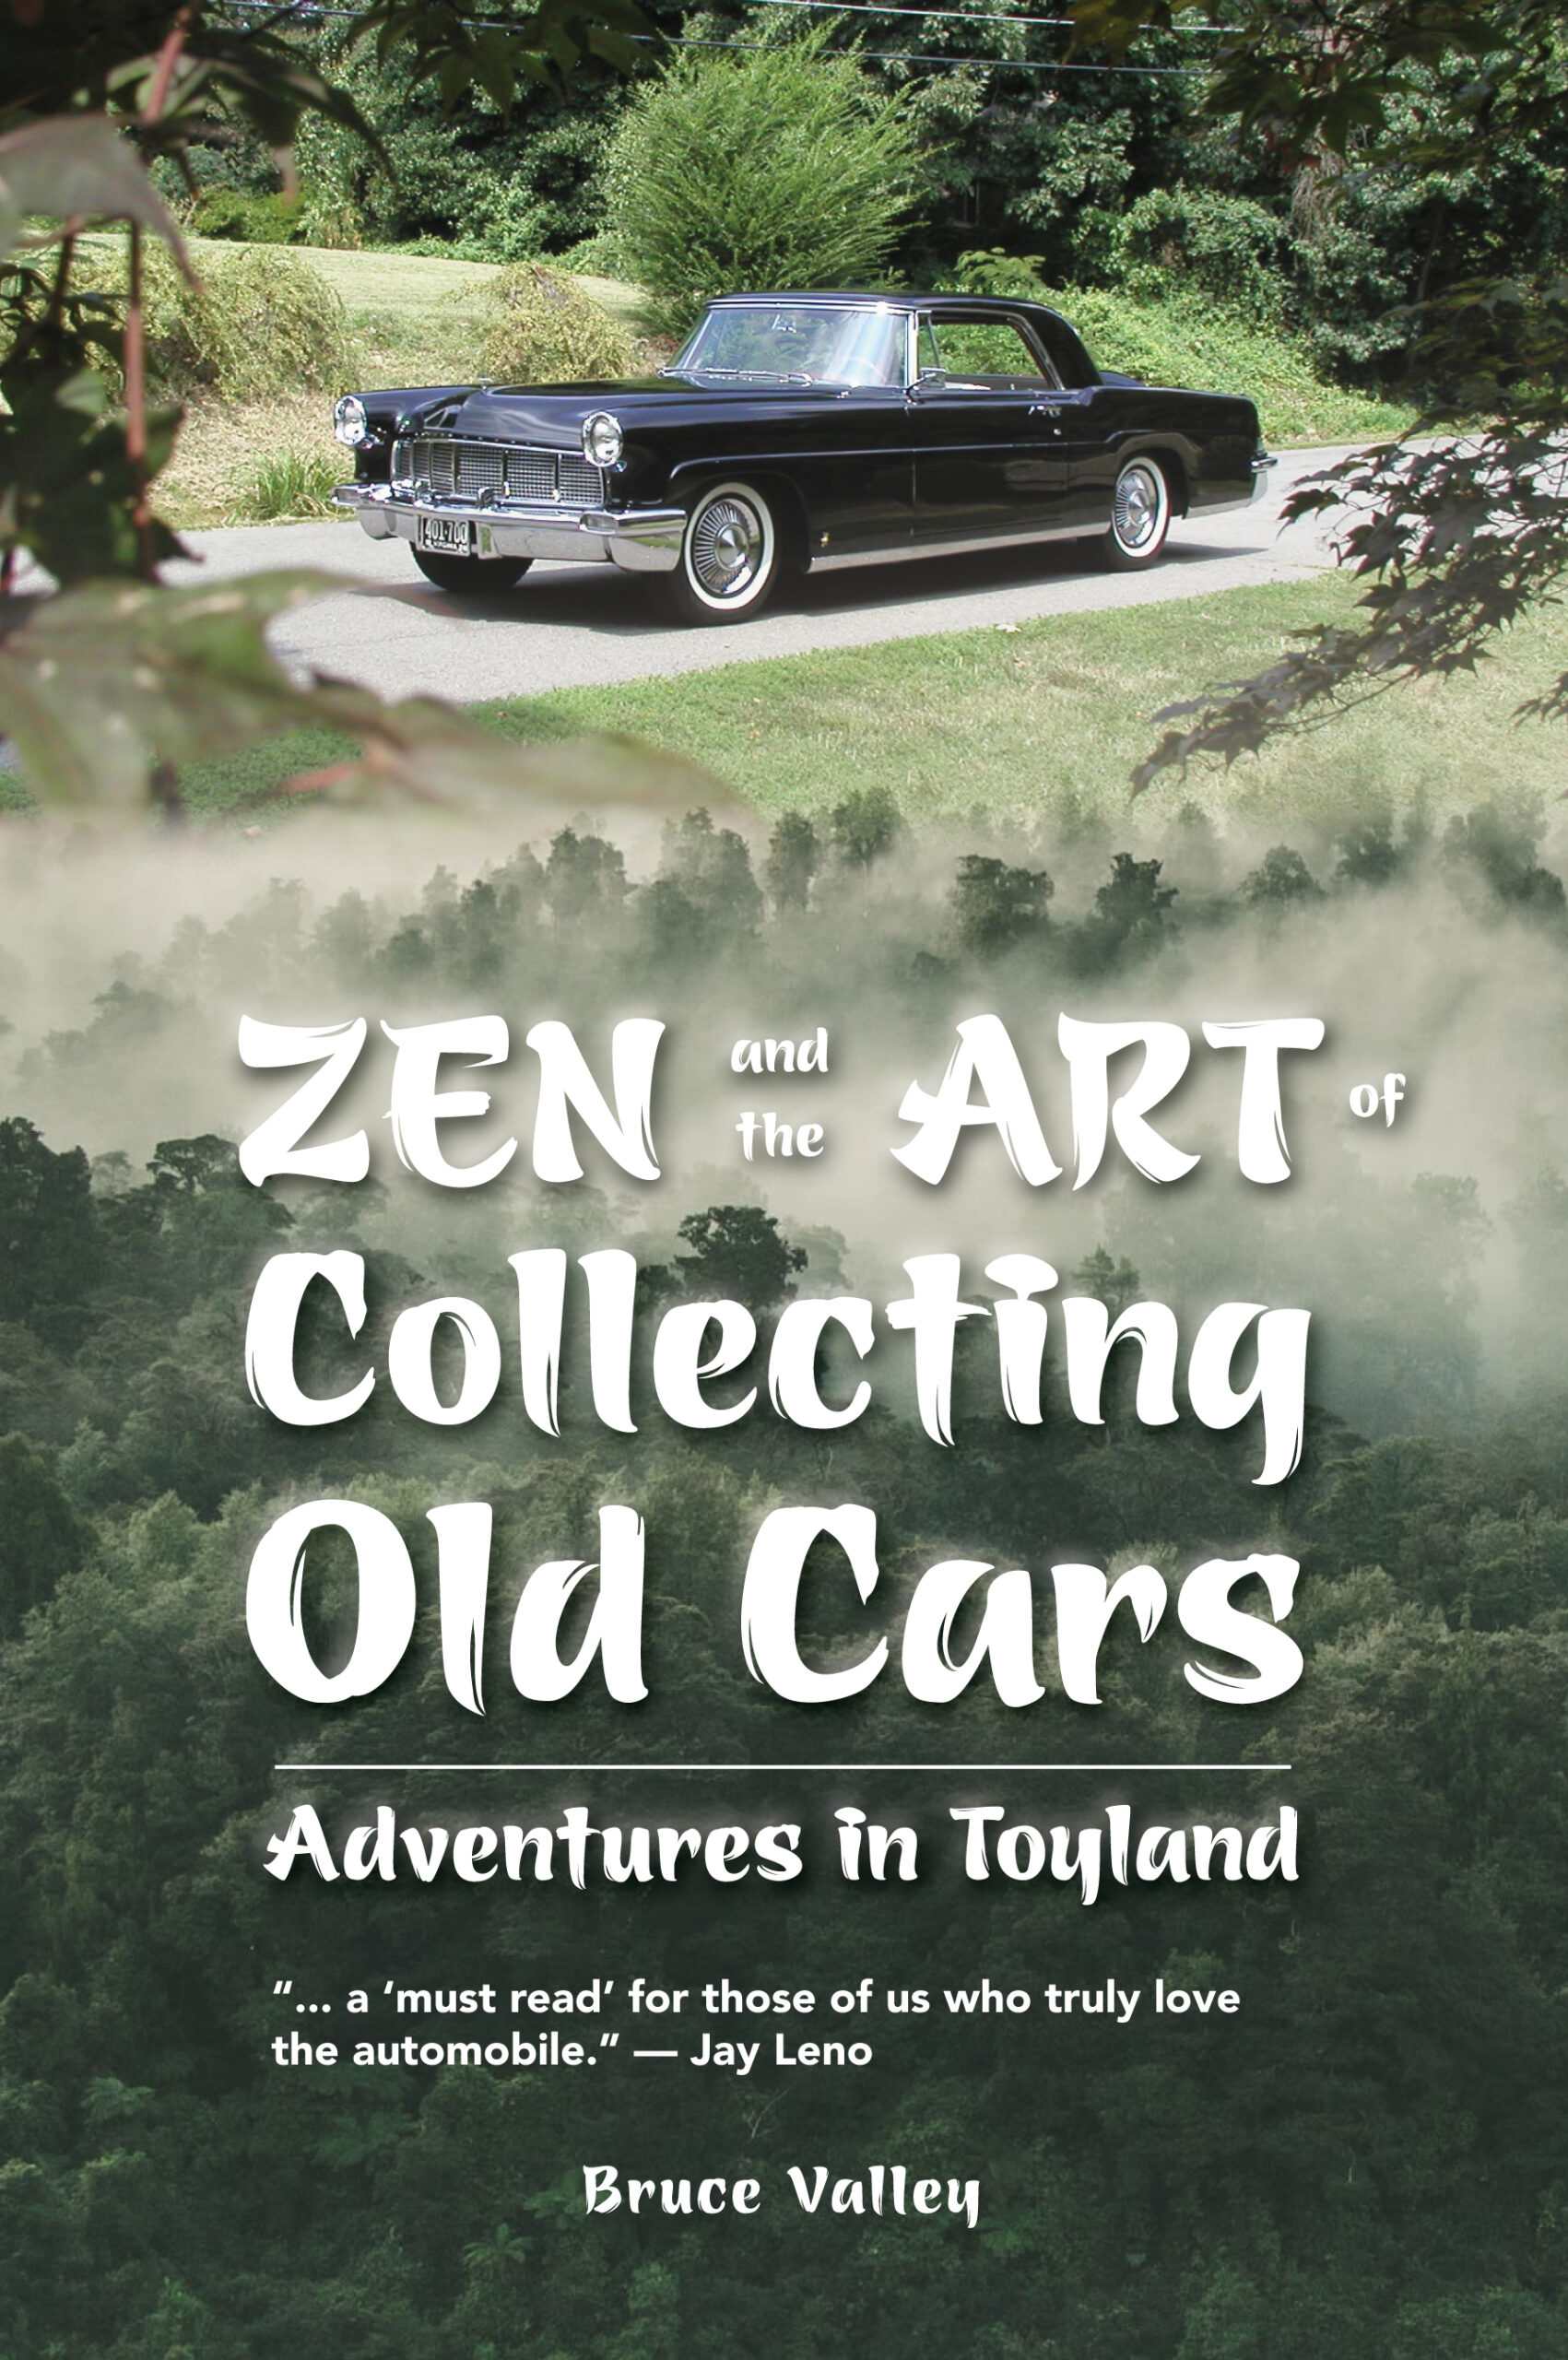 Zen and the Art of Collecting Old Cars by Bruce Valley